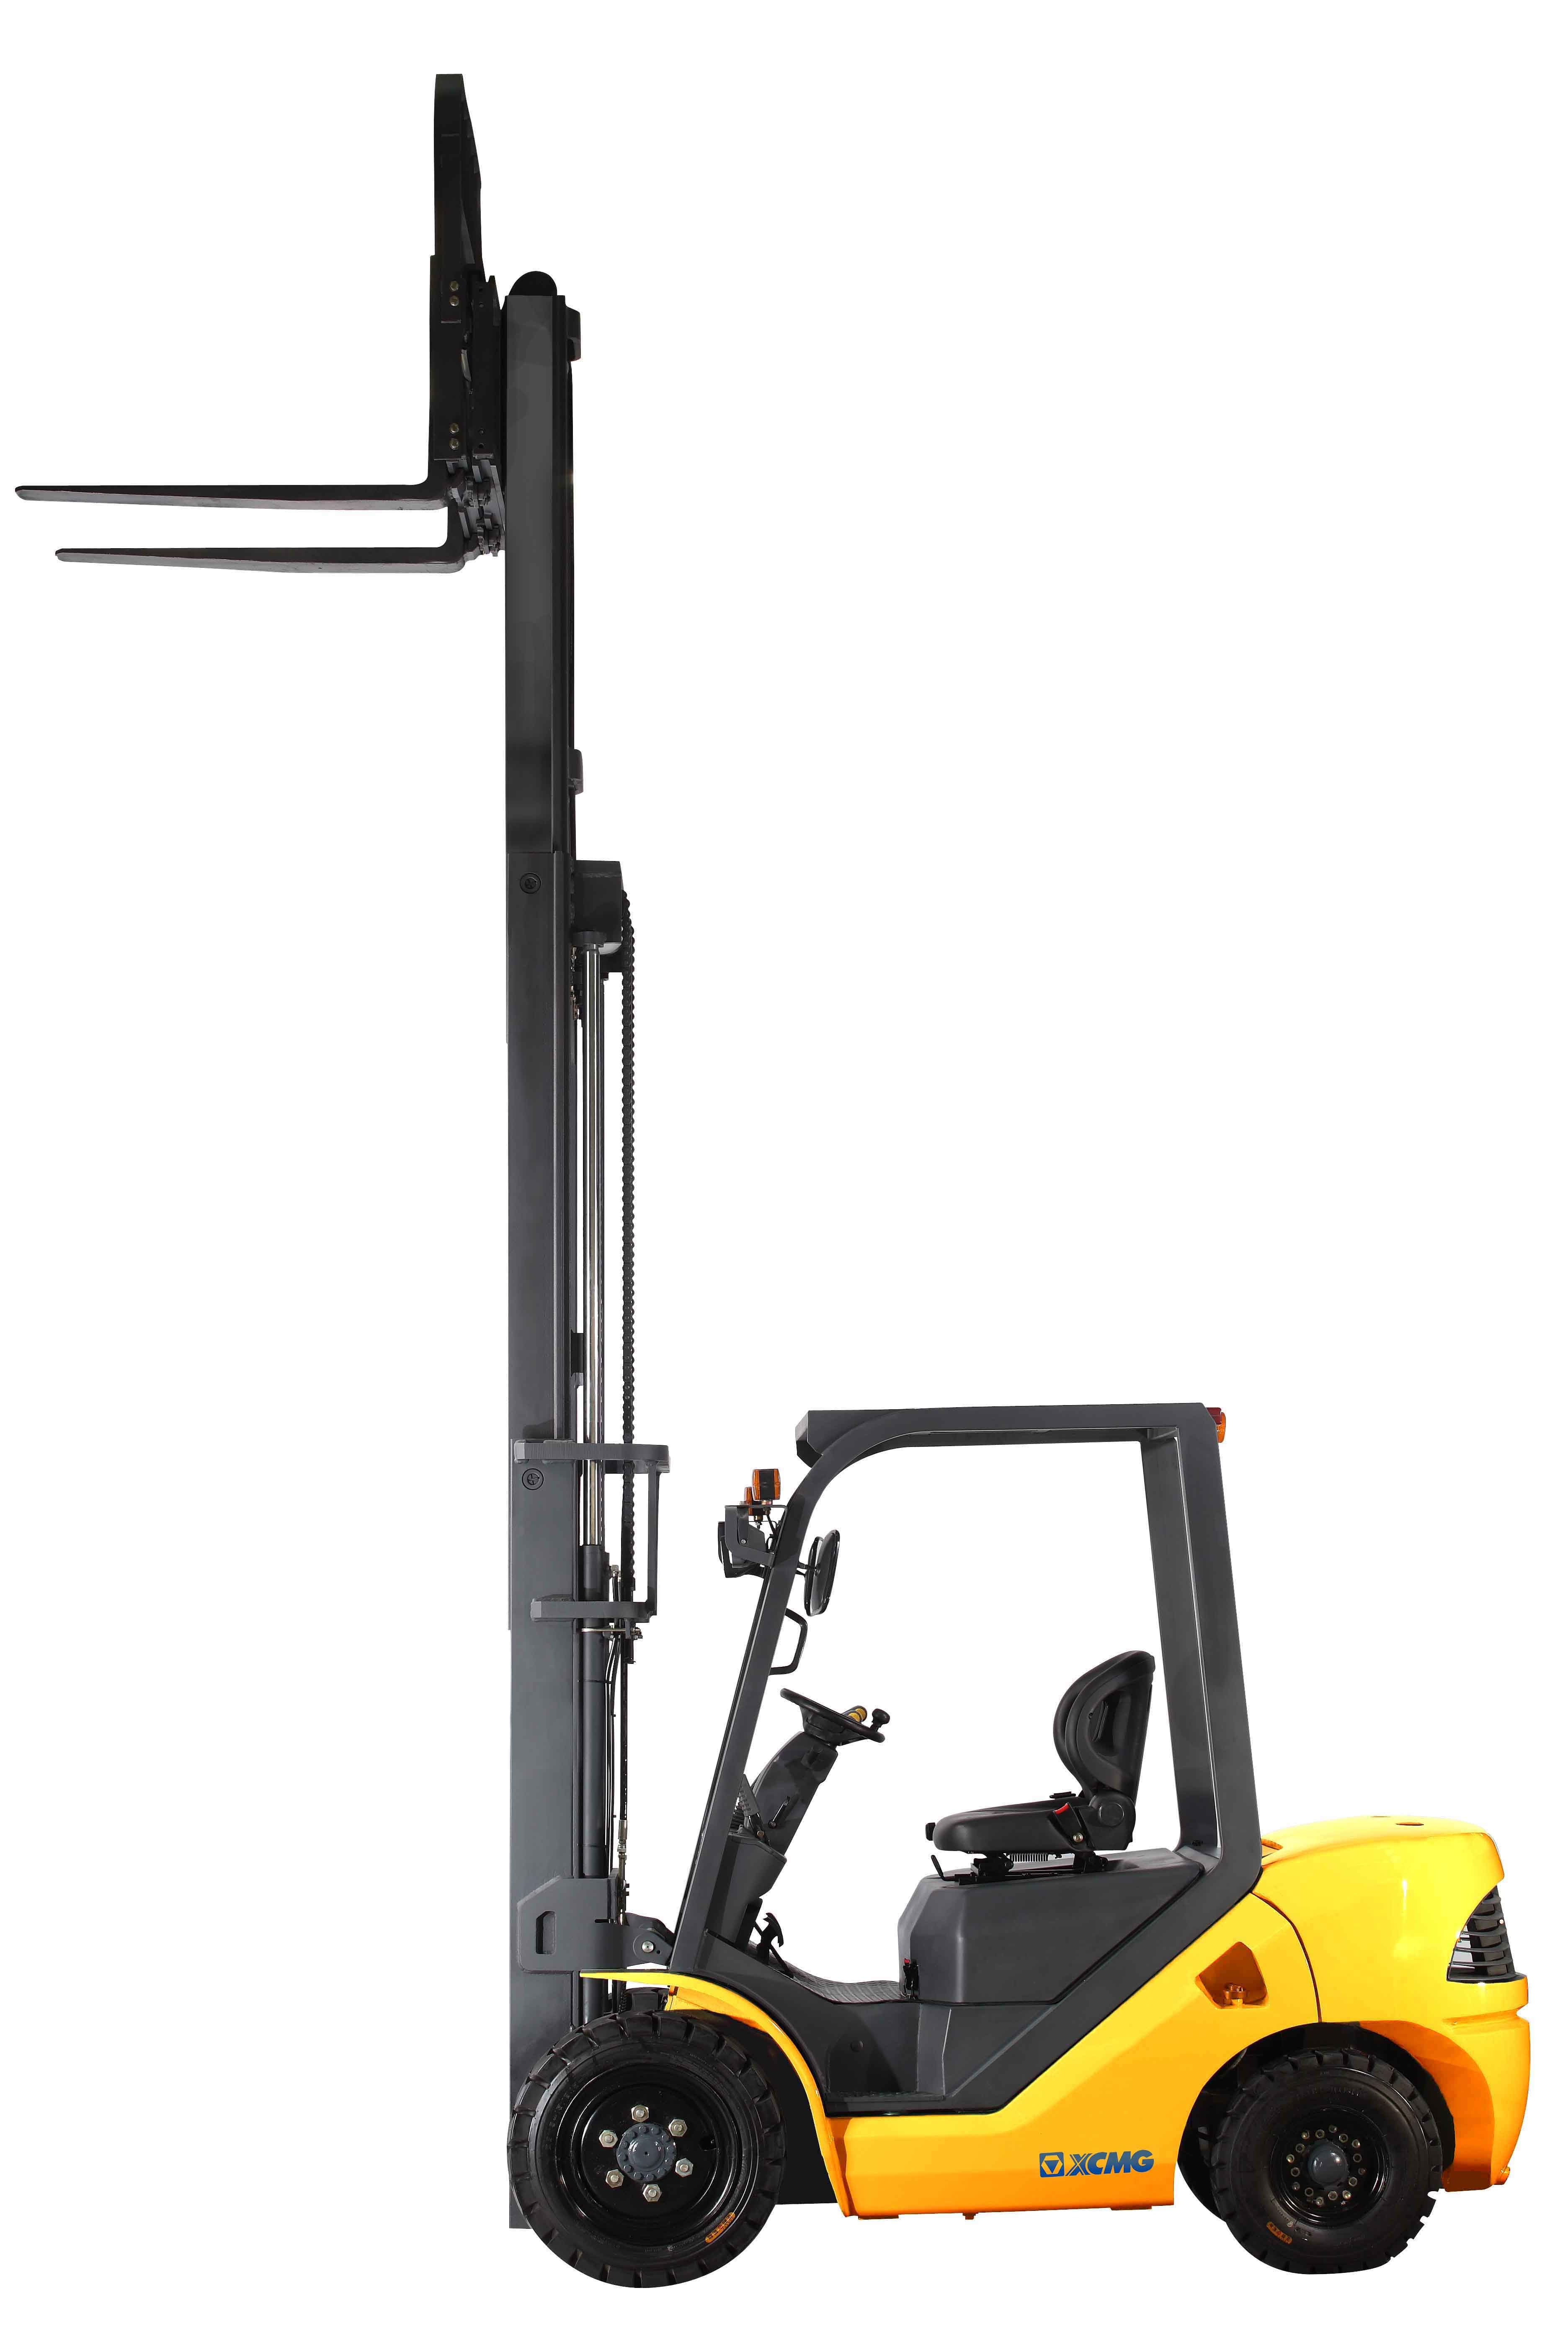 XCMG Official 3-3.5T Diesel Forklift for sale